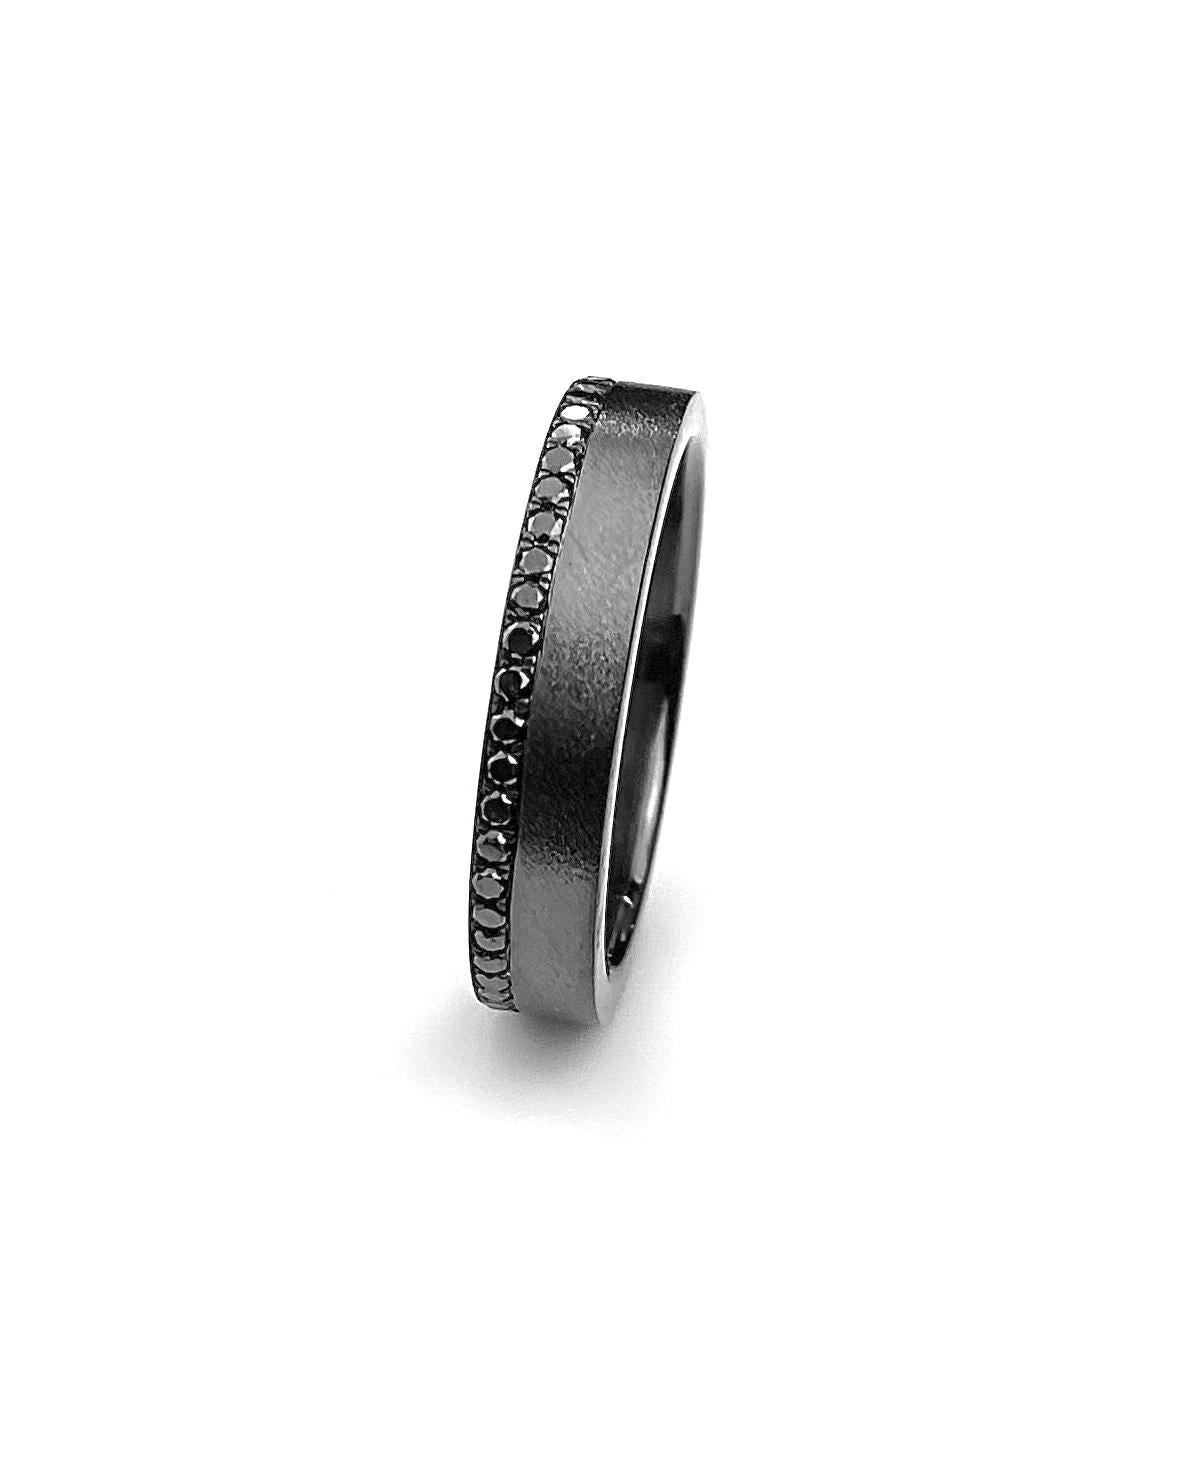 Men's wedding band in 18kt white gold, set with 0.10ct black diamonds off center on top surface of ring. Finished with light satin finish with black rhodium plating. Ring size 10.